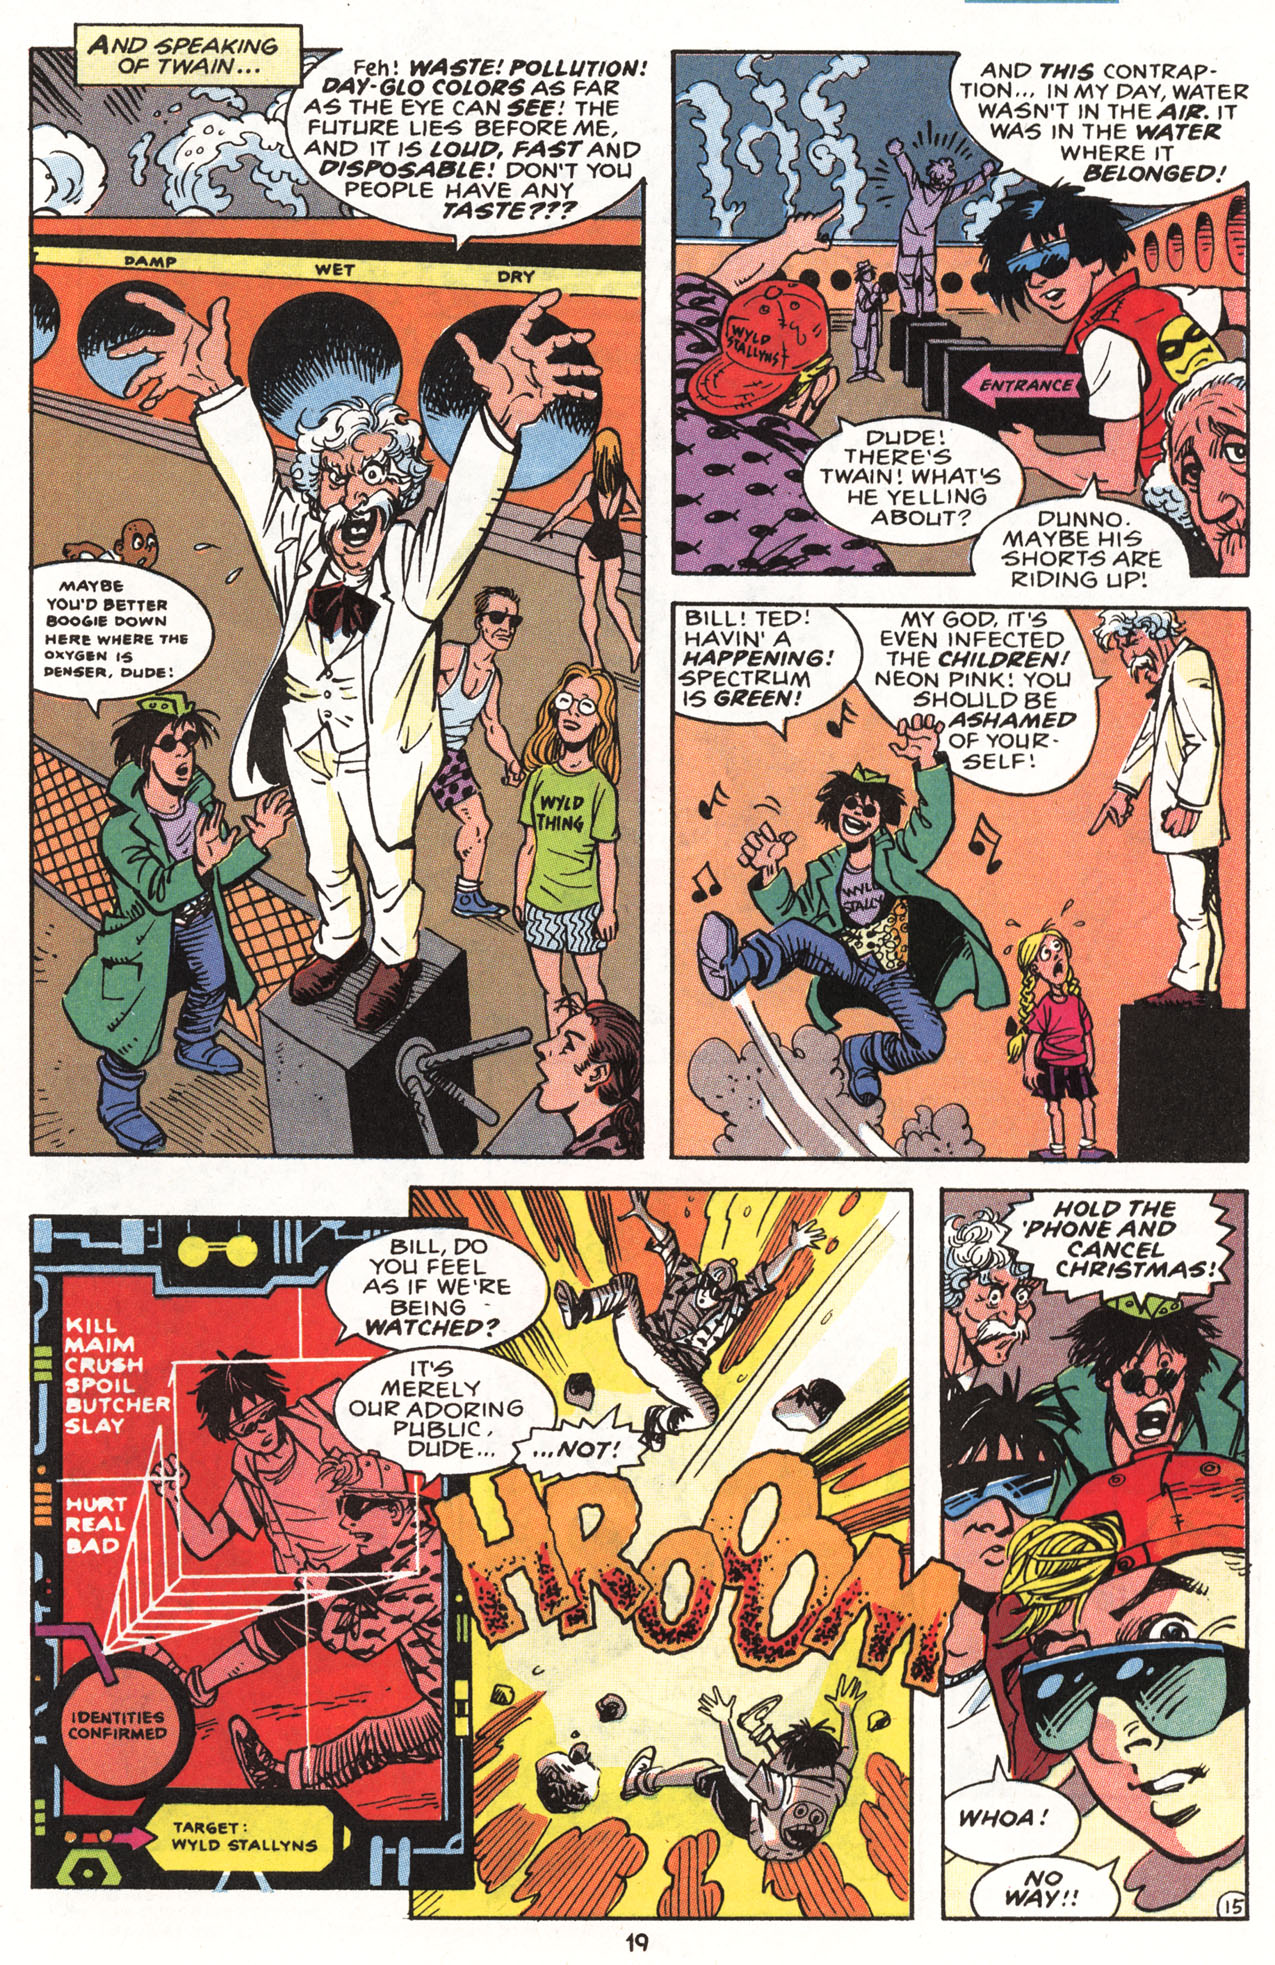 Read online Bill & Ted's Excellent Comic Book comic -  Issue #8 - 21